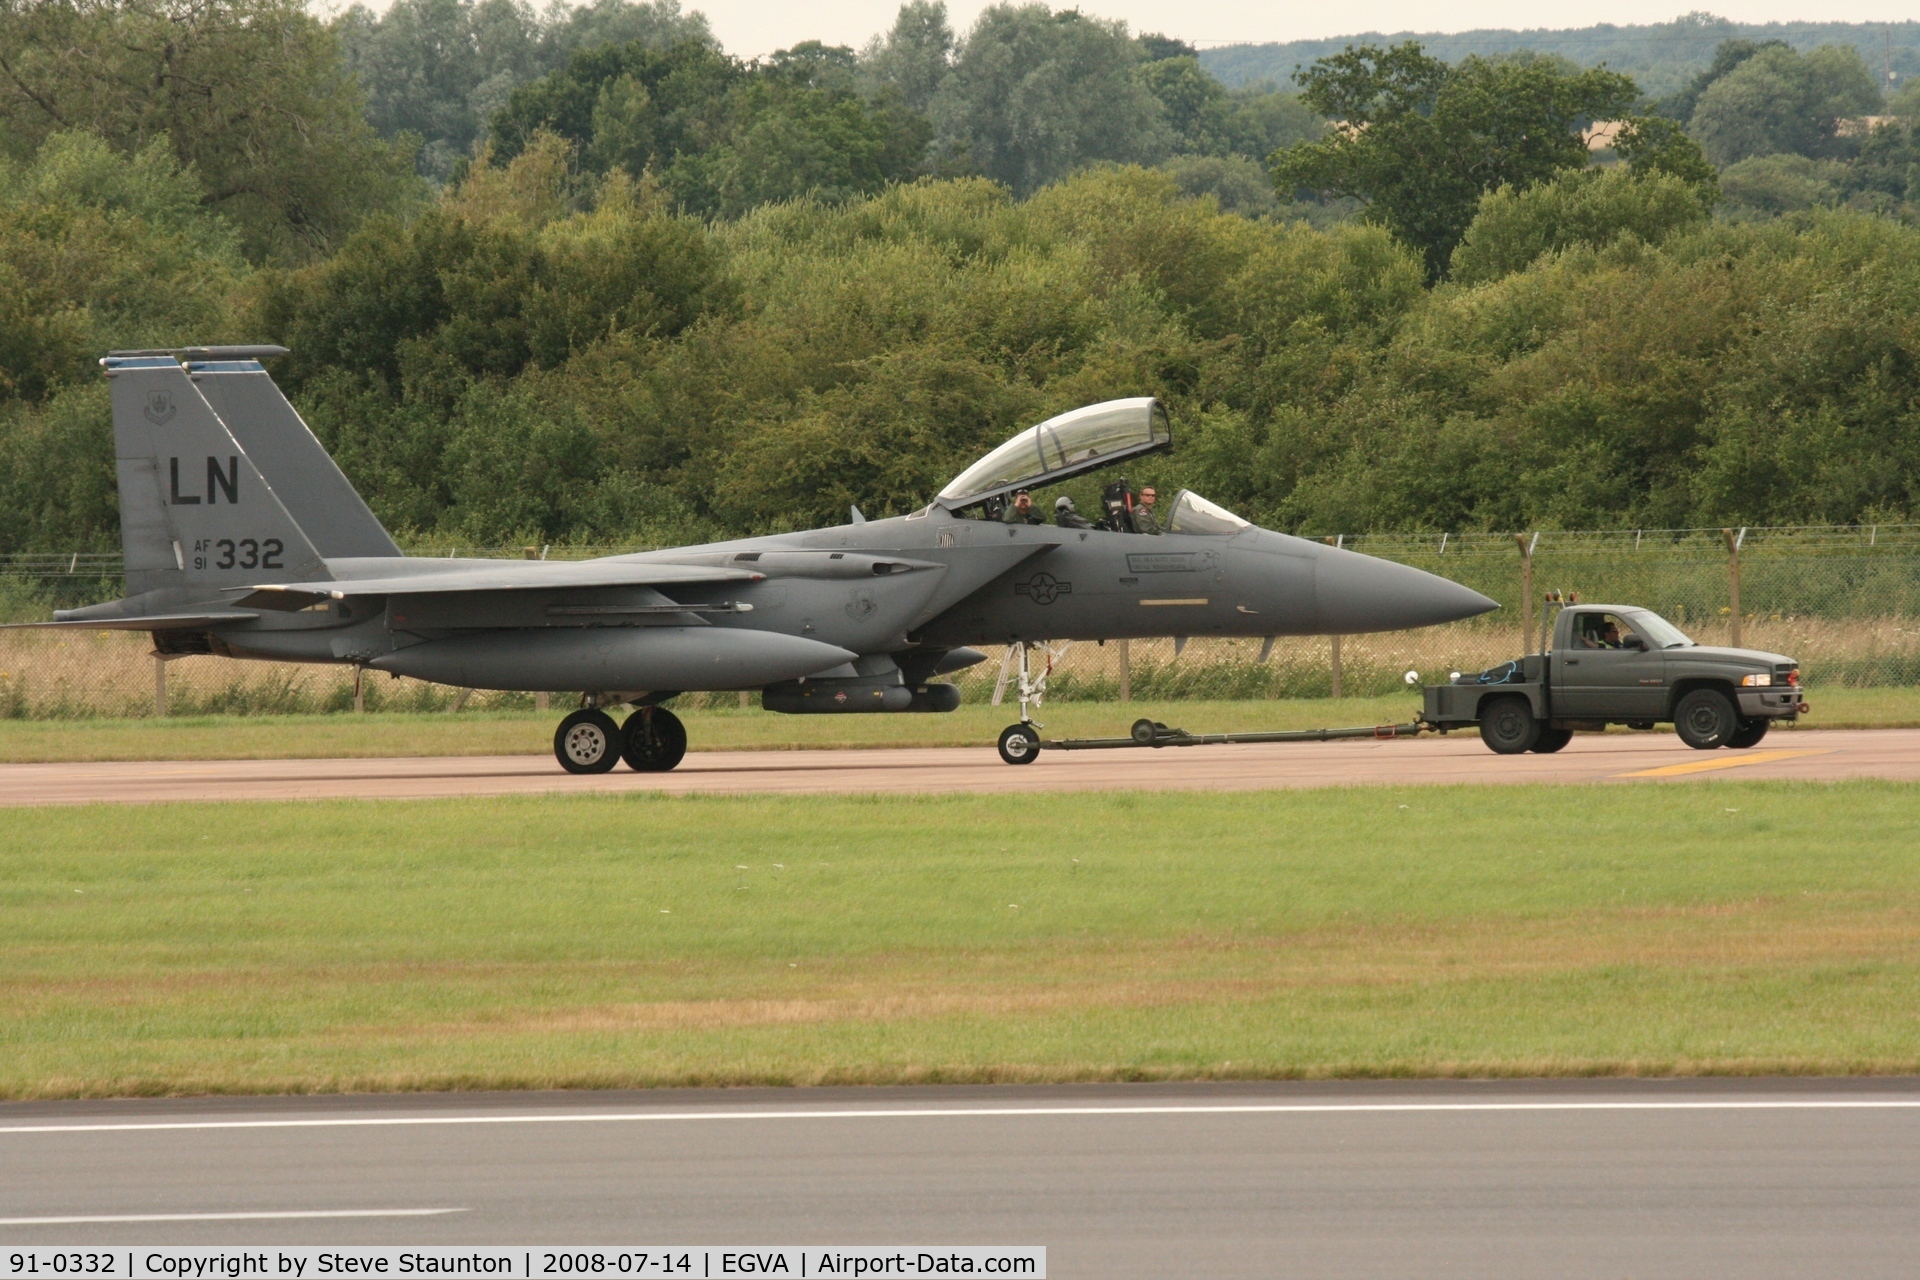 91-0332, 1991 McDonnell Douglas F-15E Strike Eagle C/N 1239/E197, Taken at the Royal International Air Tattoo 2008 during arrivals and departures (show days cancelled due to bad weather)